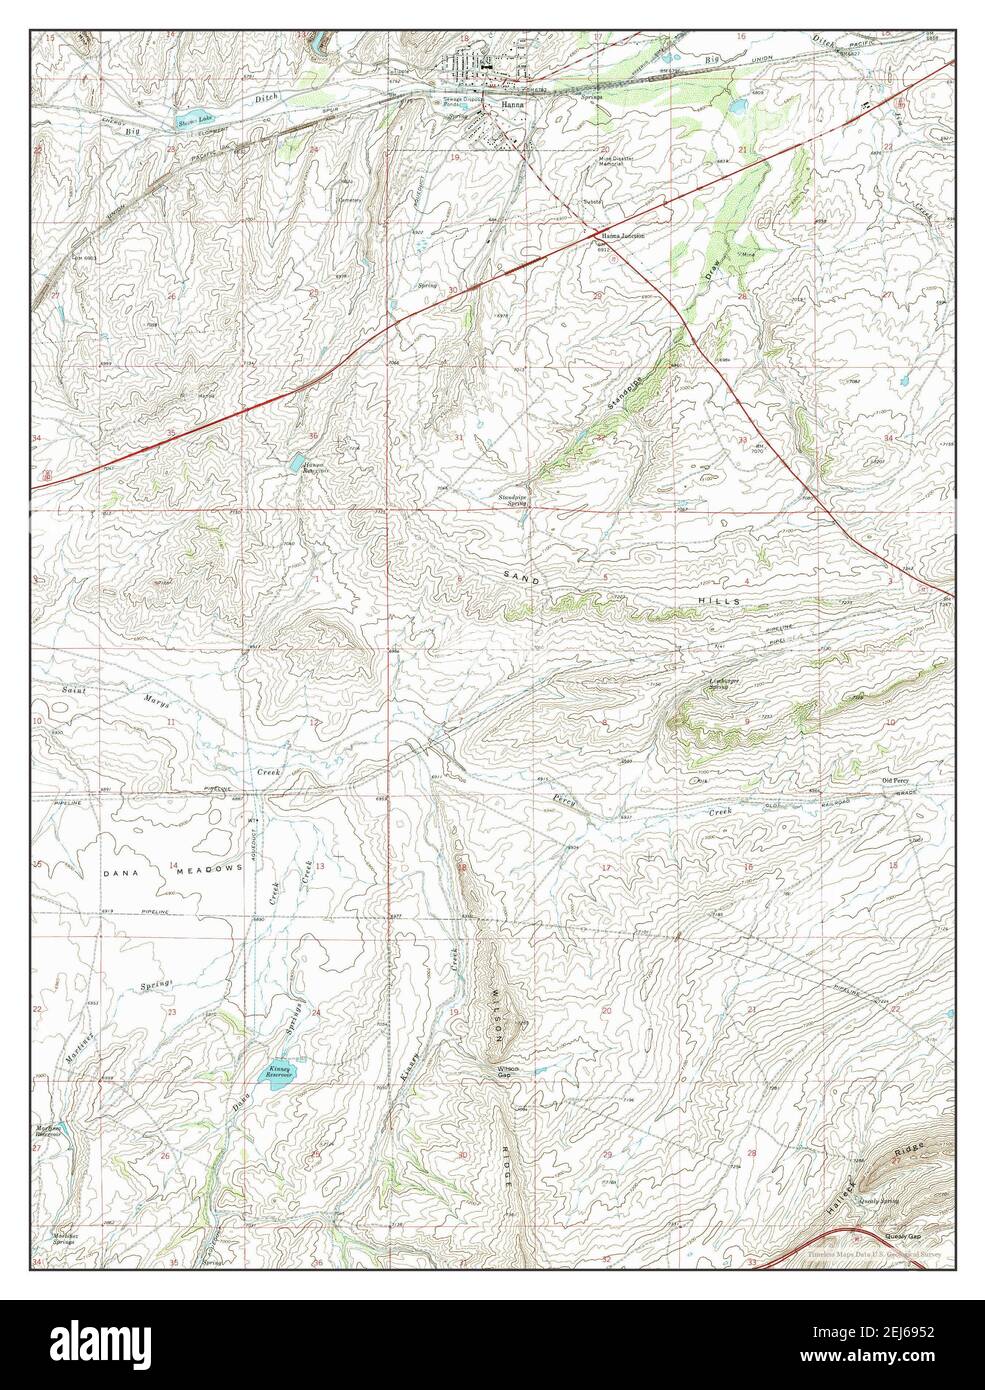 Hanna, Wyoming, map 1971, 1:24000, United States of America by Timeless Maps, data U.S. Geological Survey Stock Photo